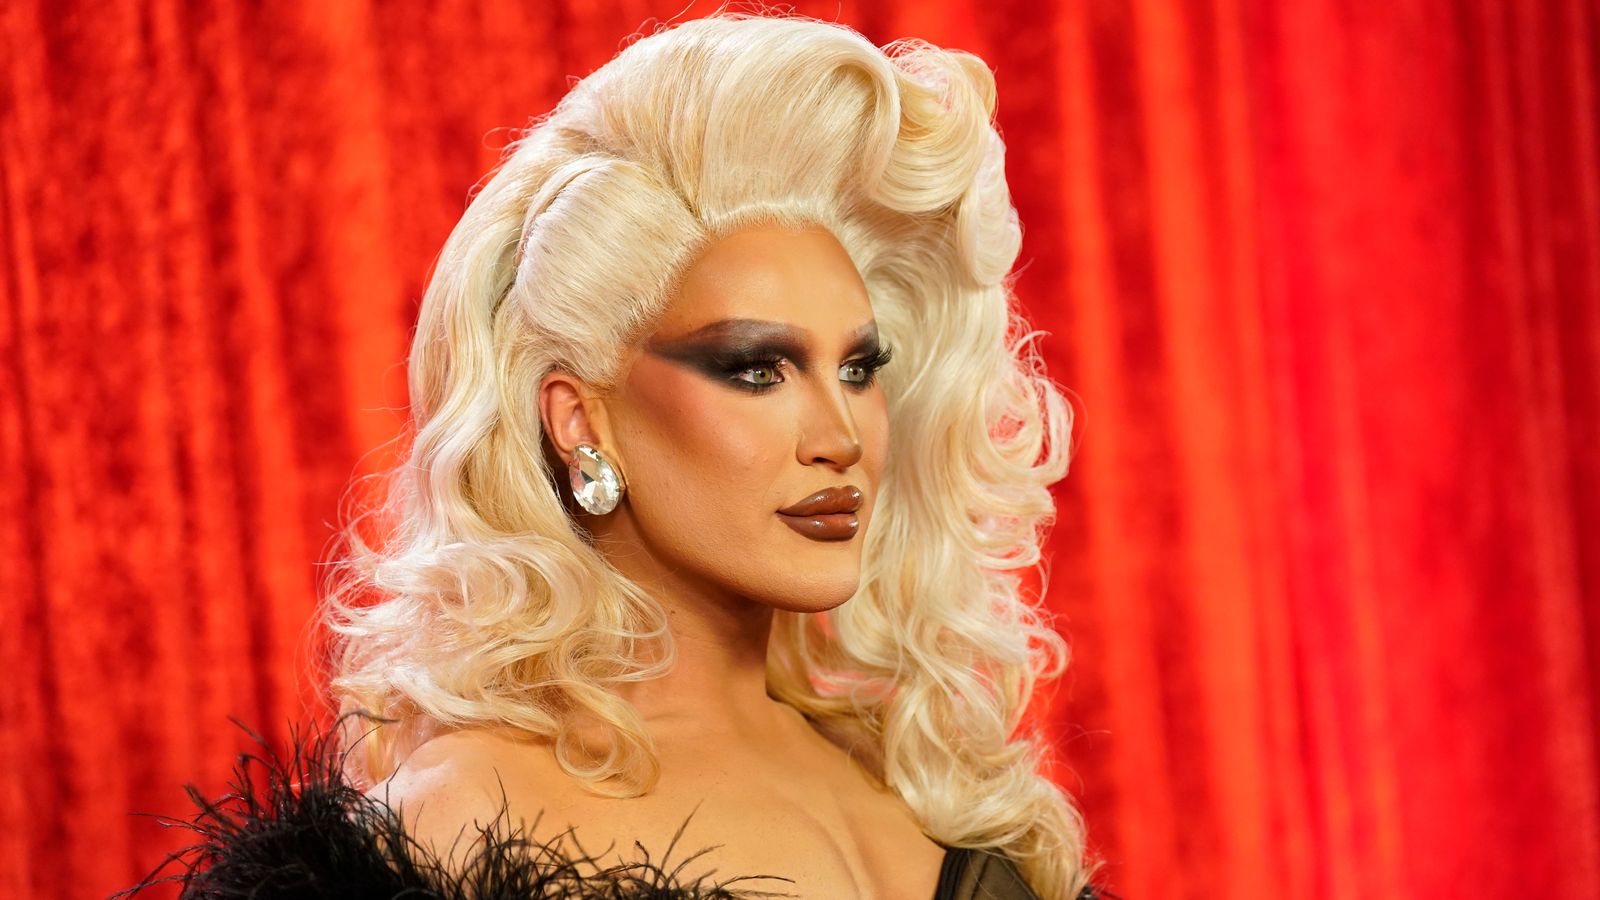 Man charged after alleged homophobic attack on Drag Race star The Vivienne